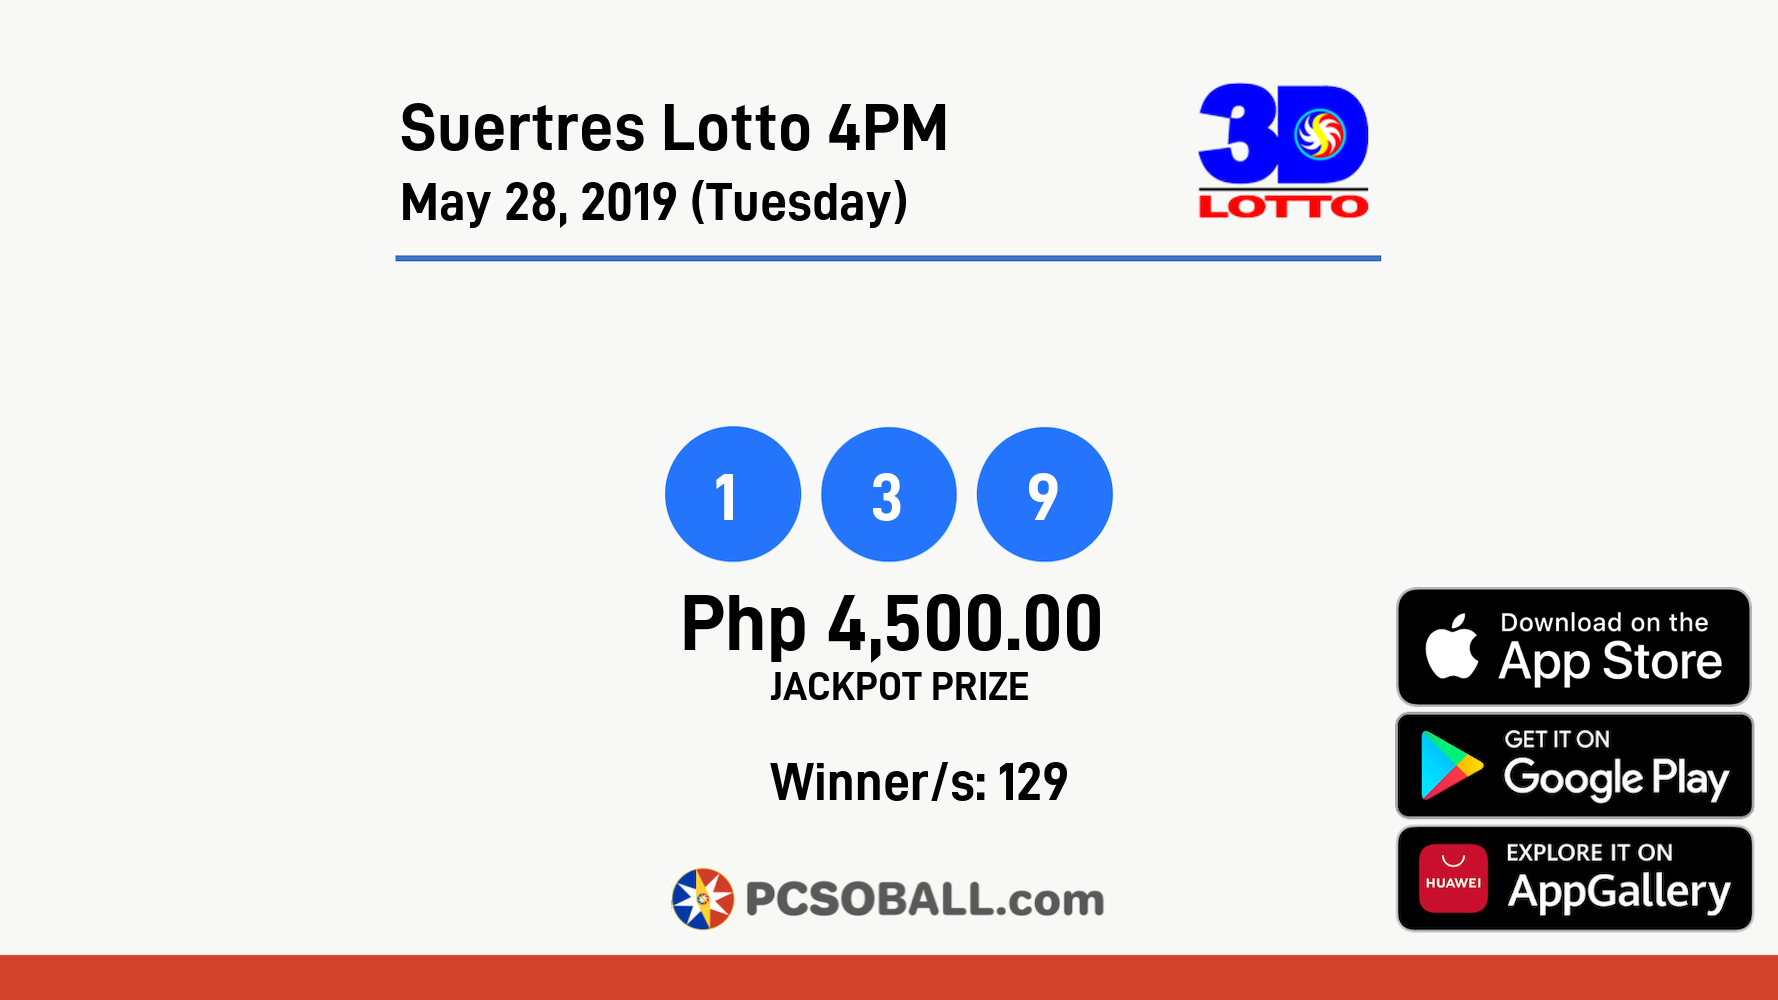 Suertres Lotto 4PM May 28, 2019 (Tuesday) Result